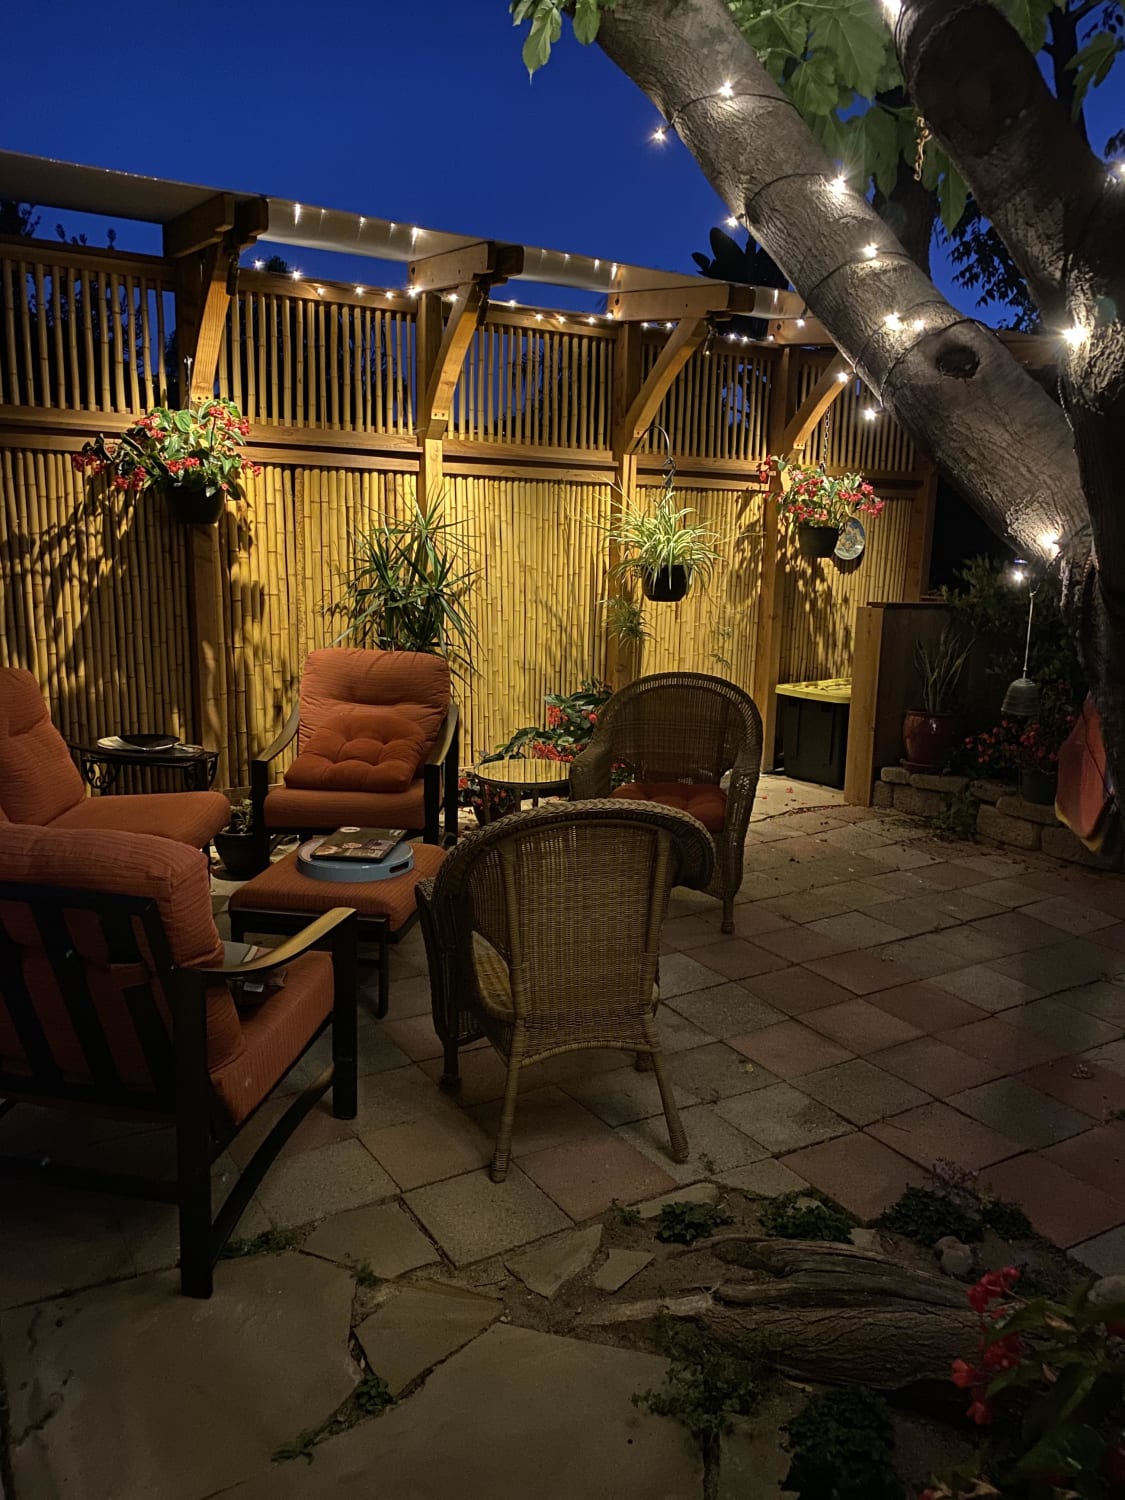 My parent’s back patio on a summer night